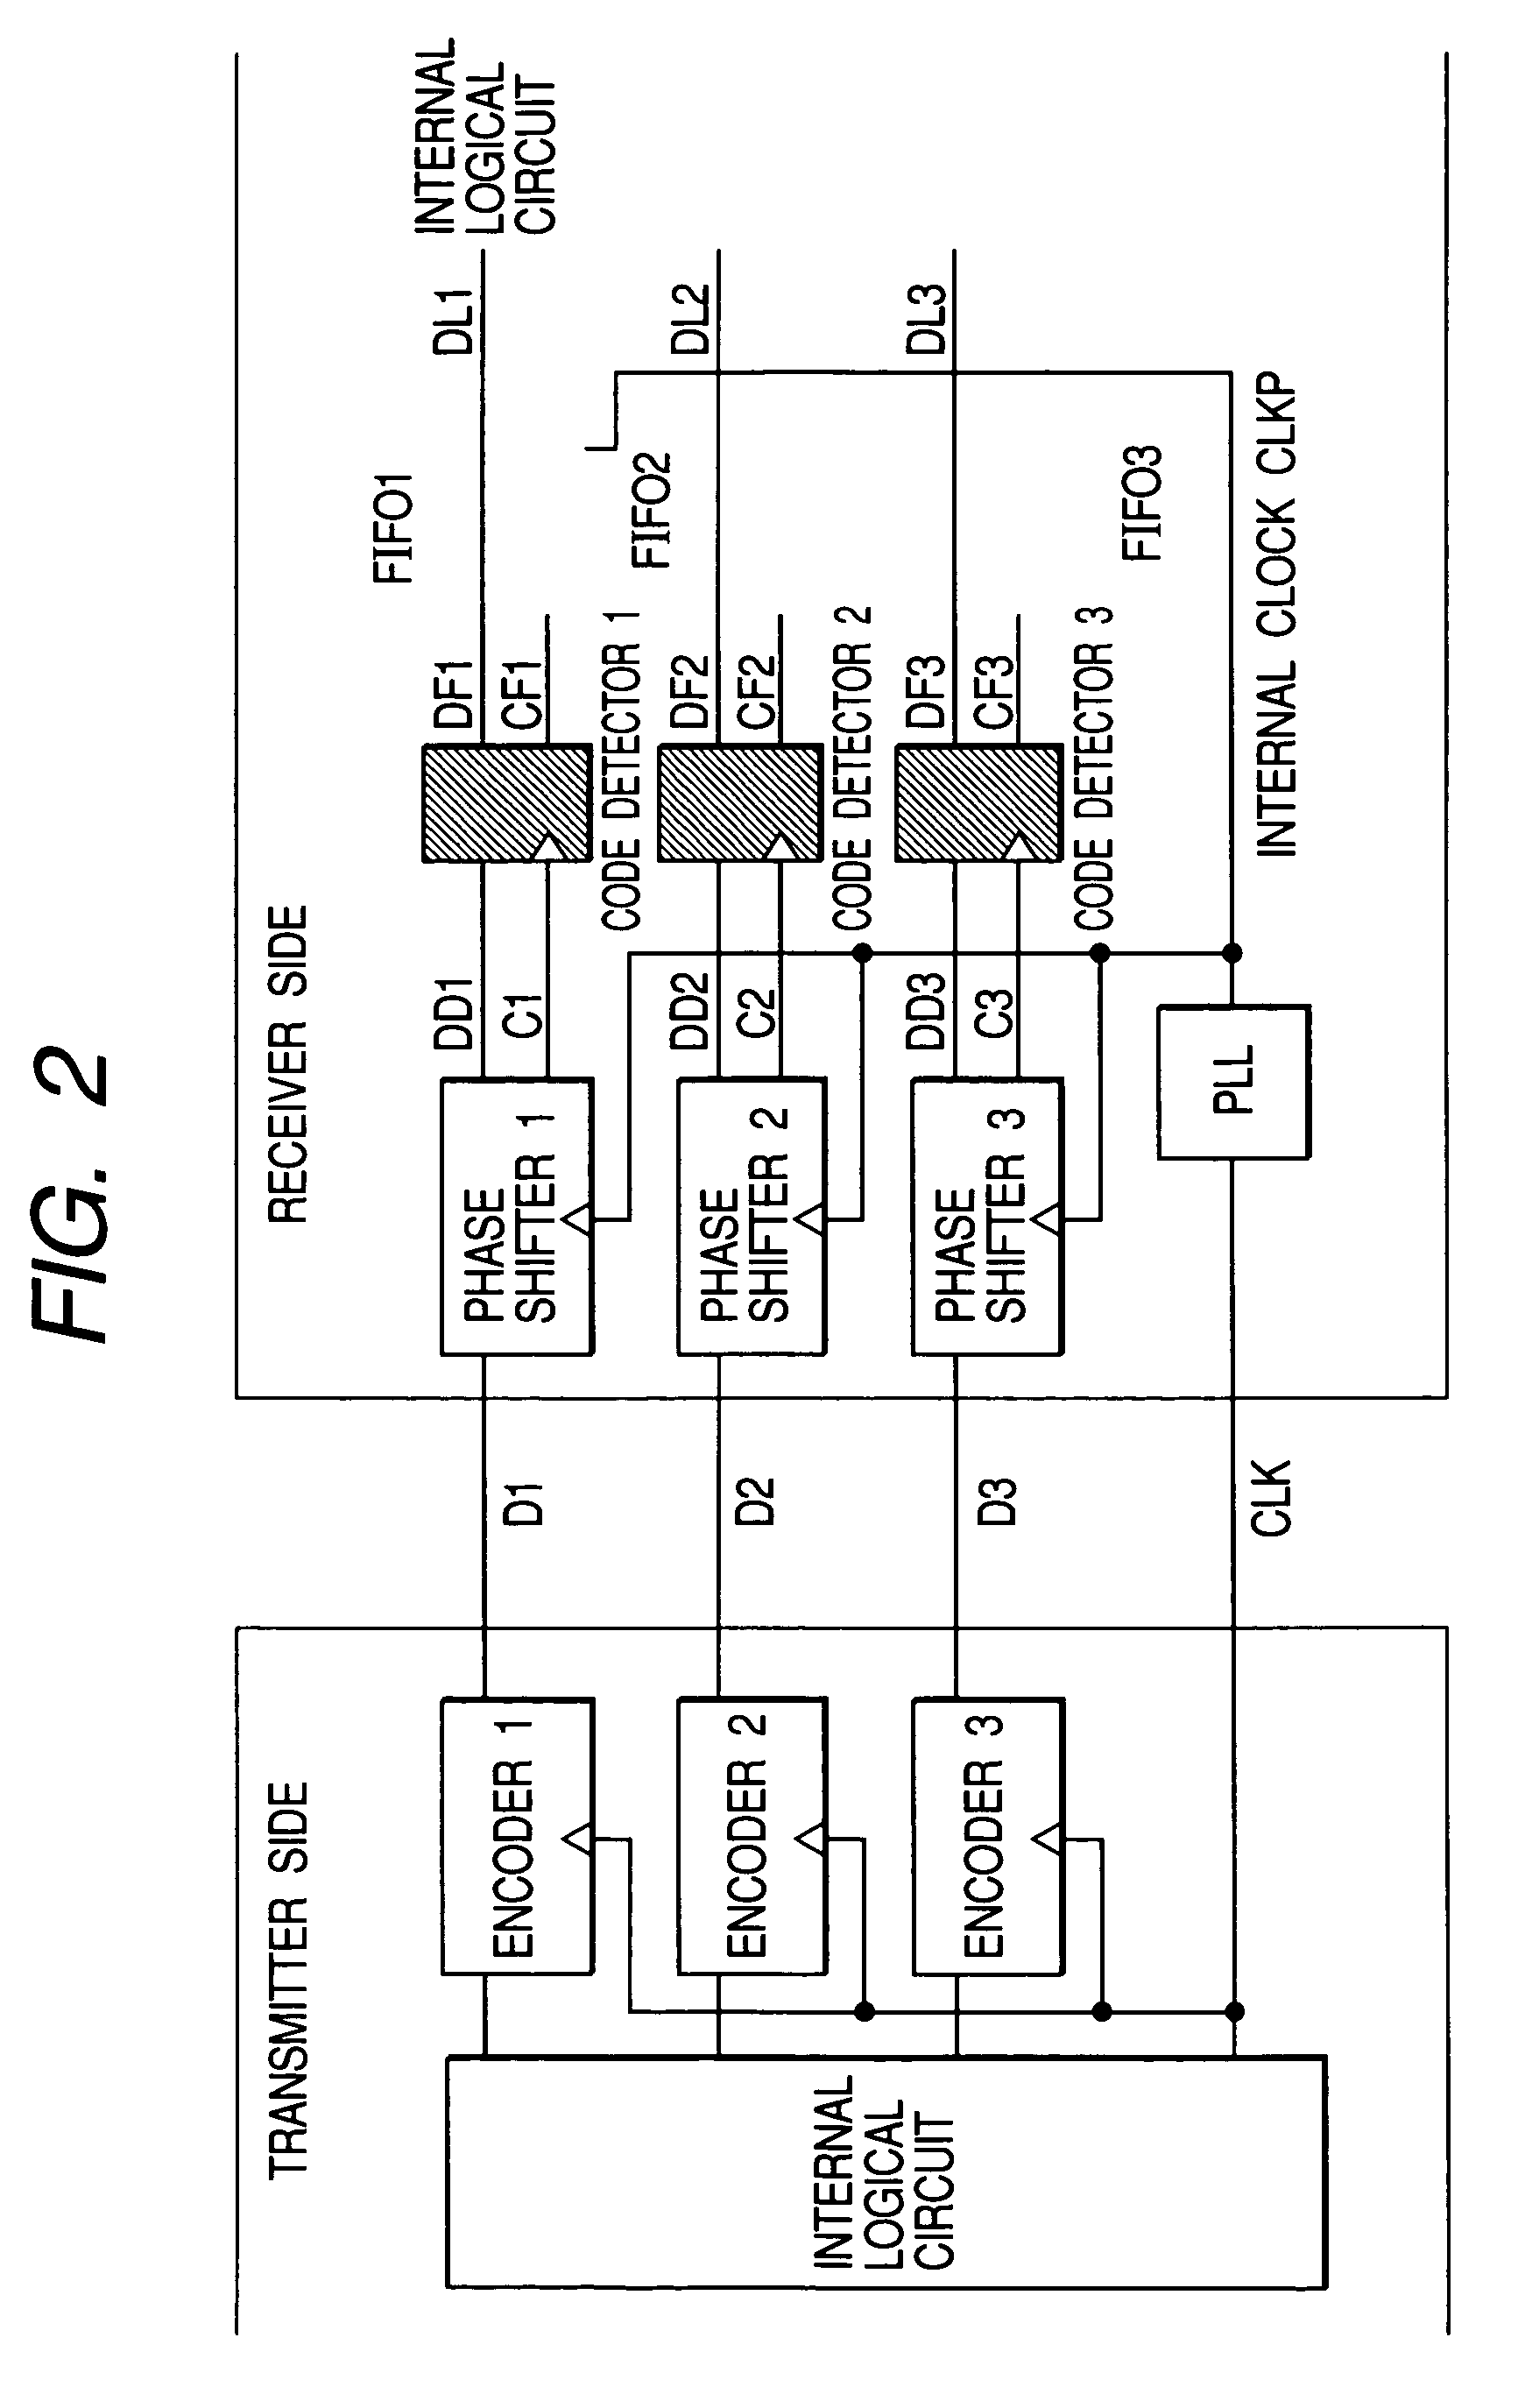 Phase shifter, phase shifting method and skew compensation system for high-speed parallel signaling